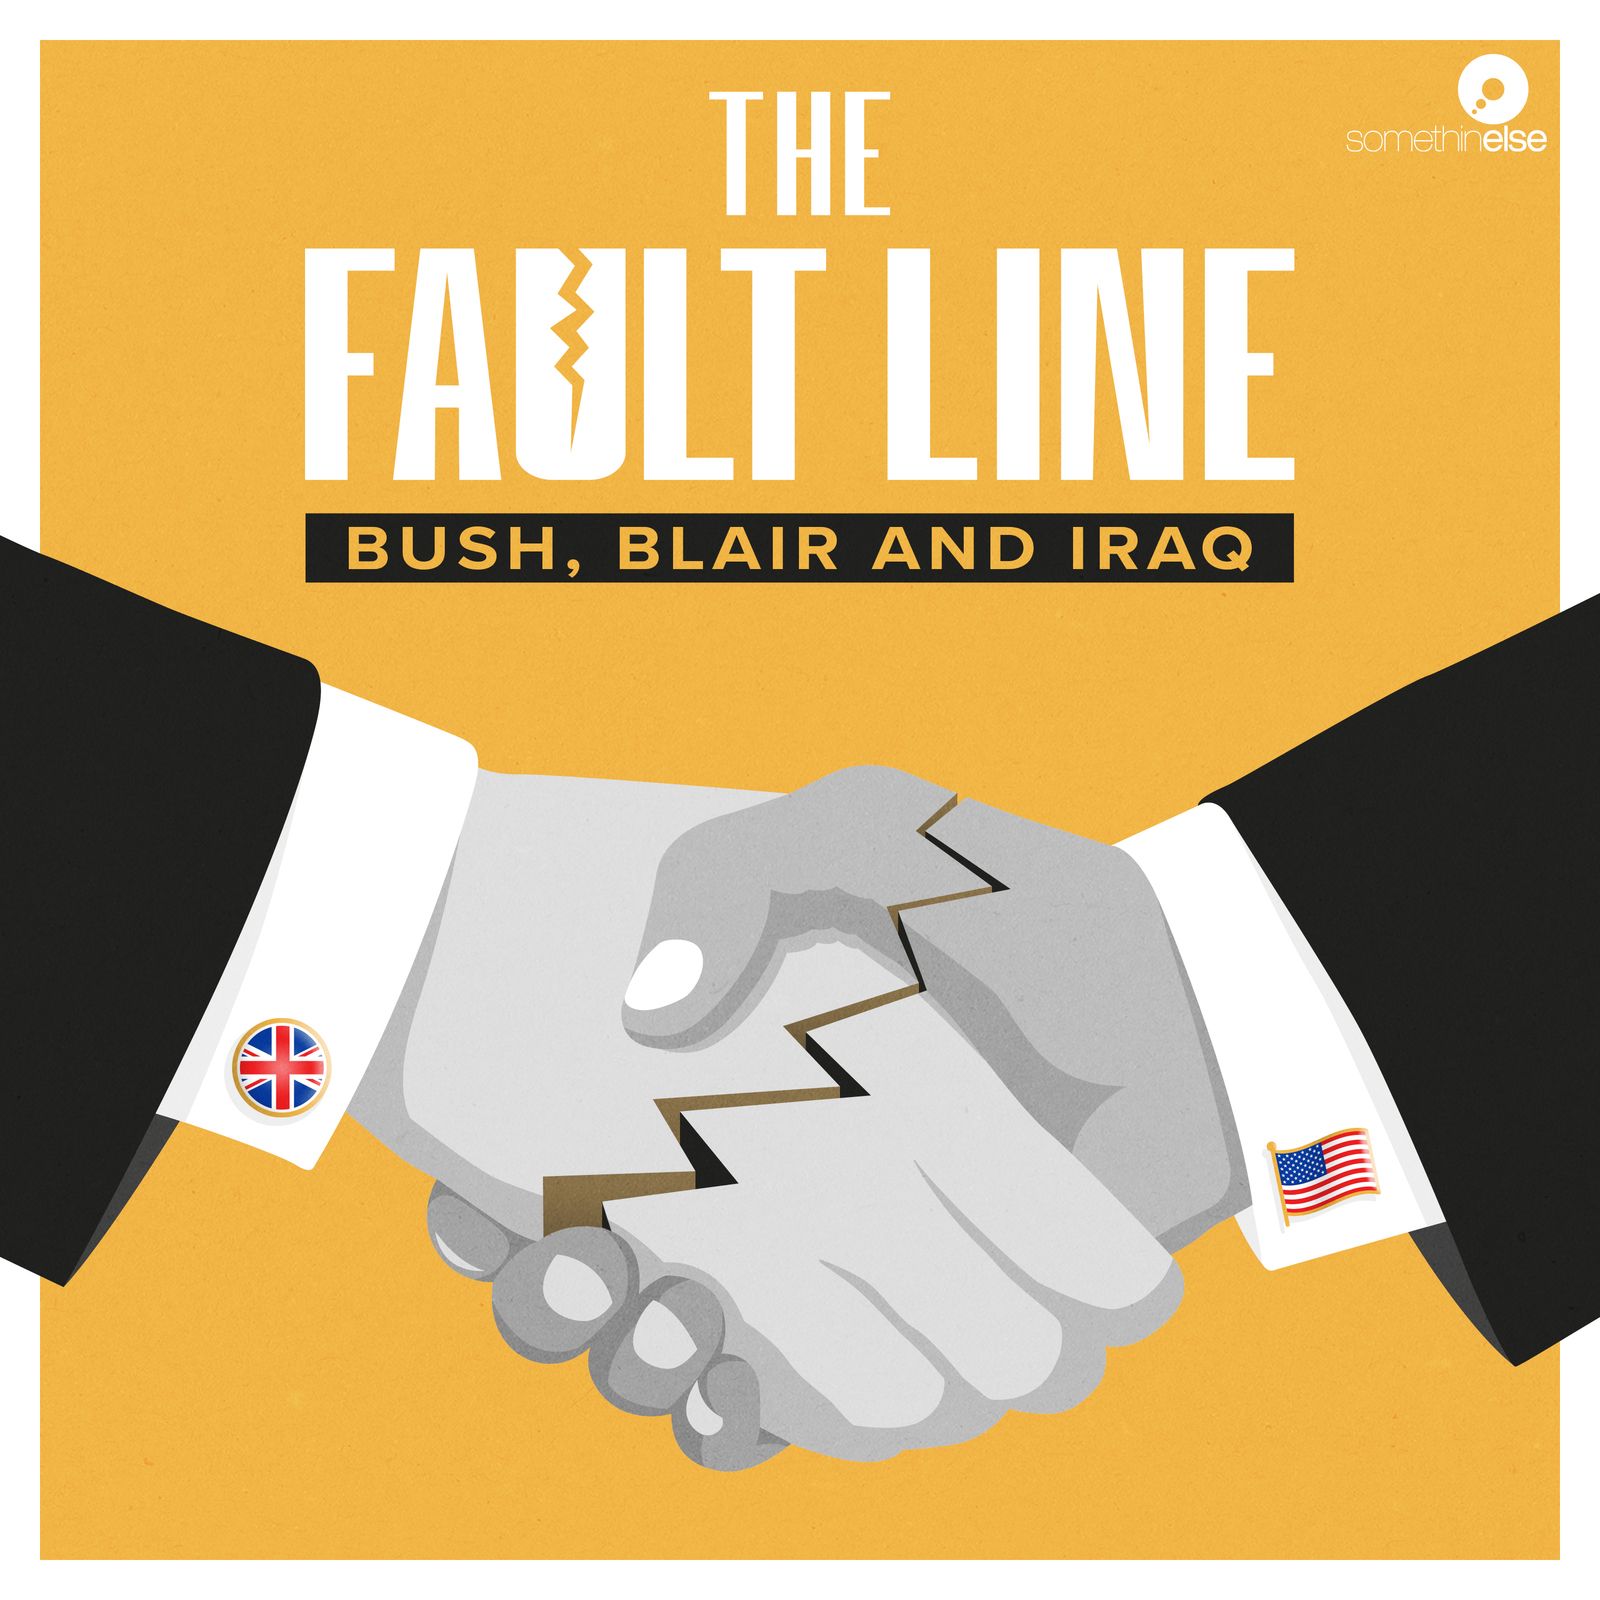 Introducing: The Fault Line: Bush, Blair and Iraq